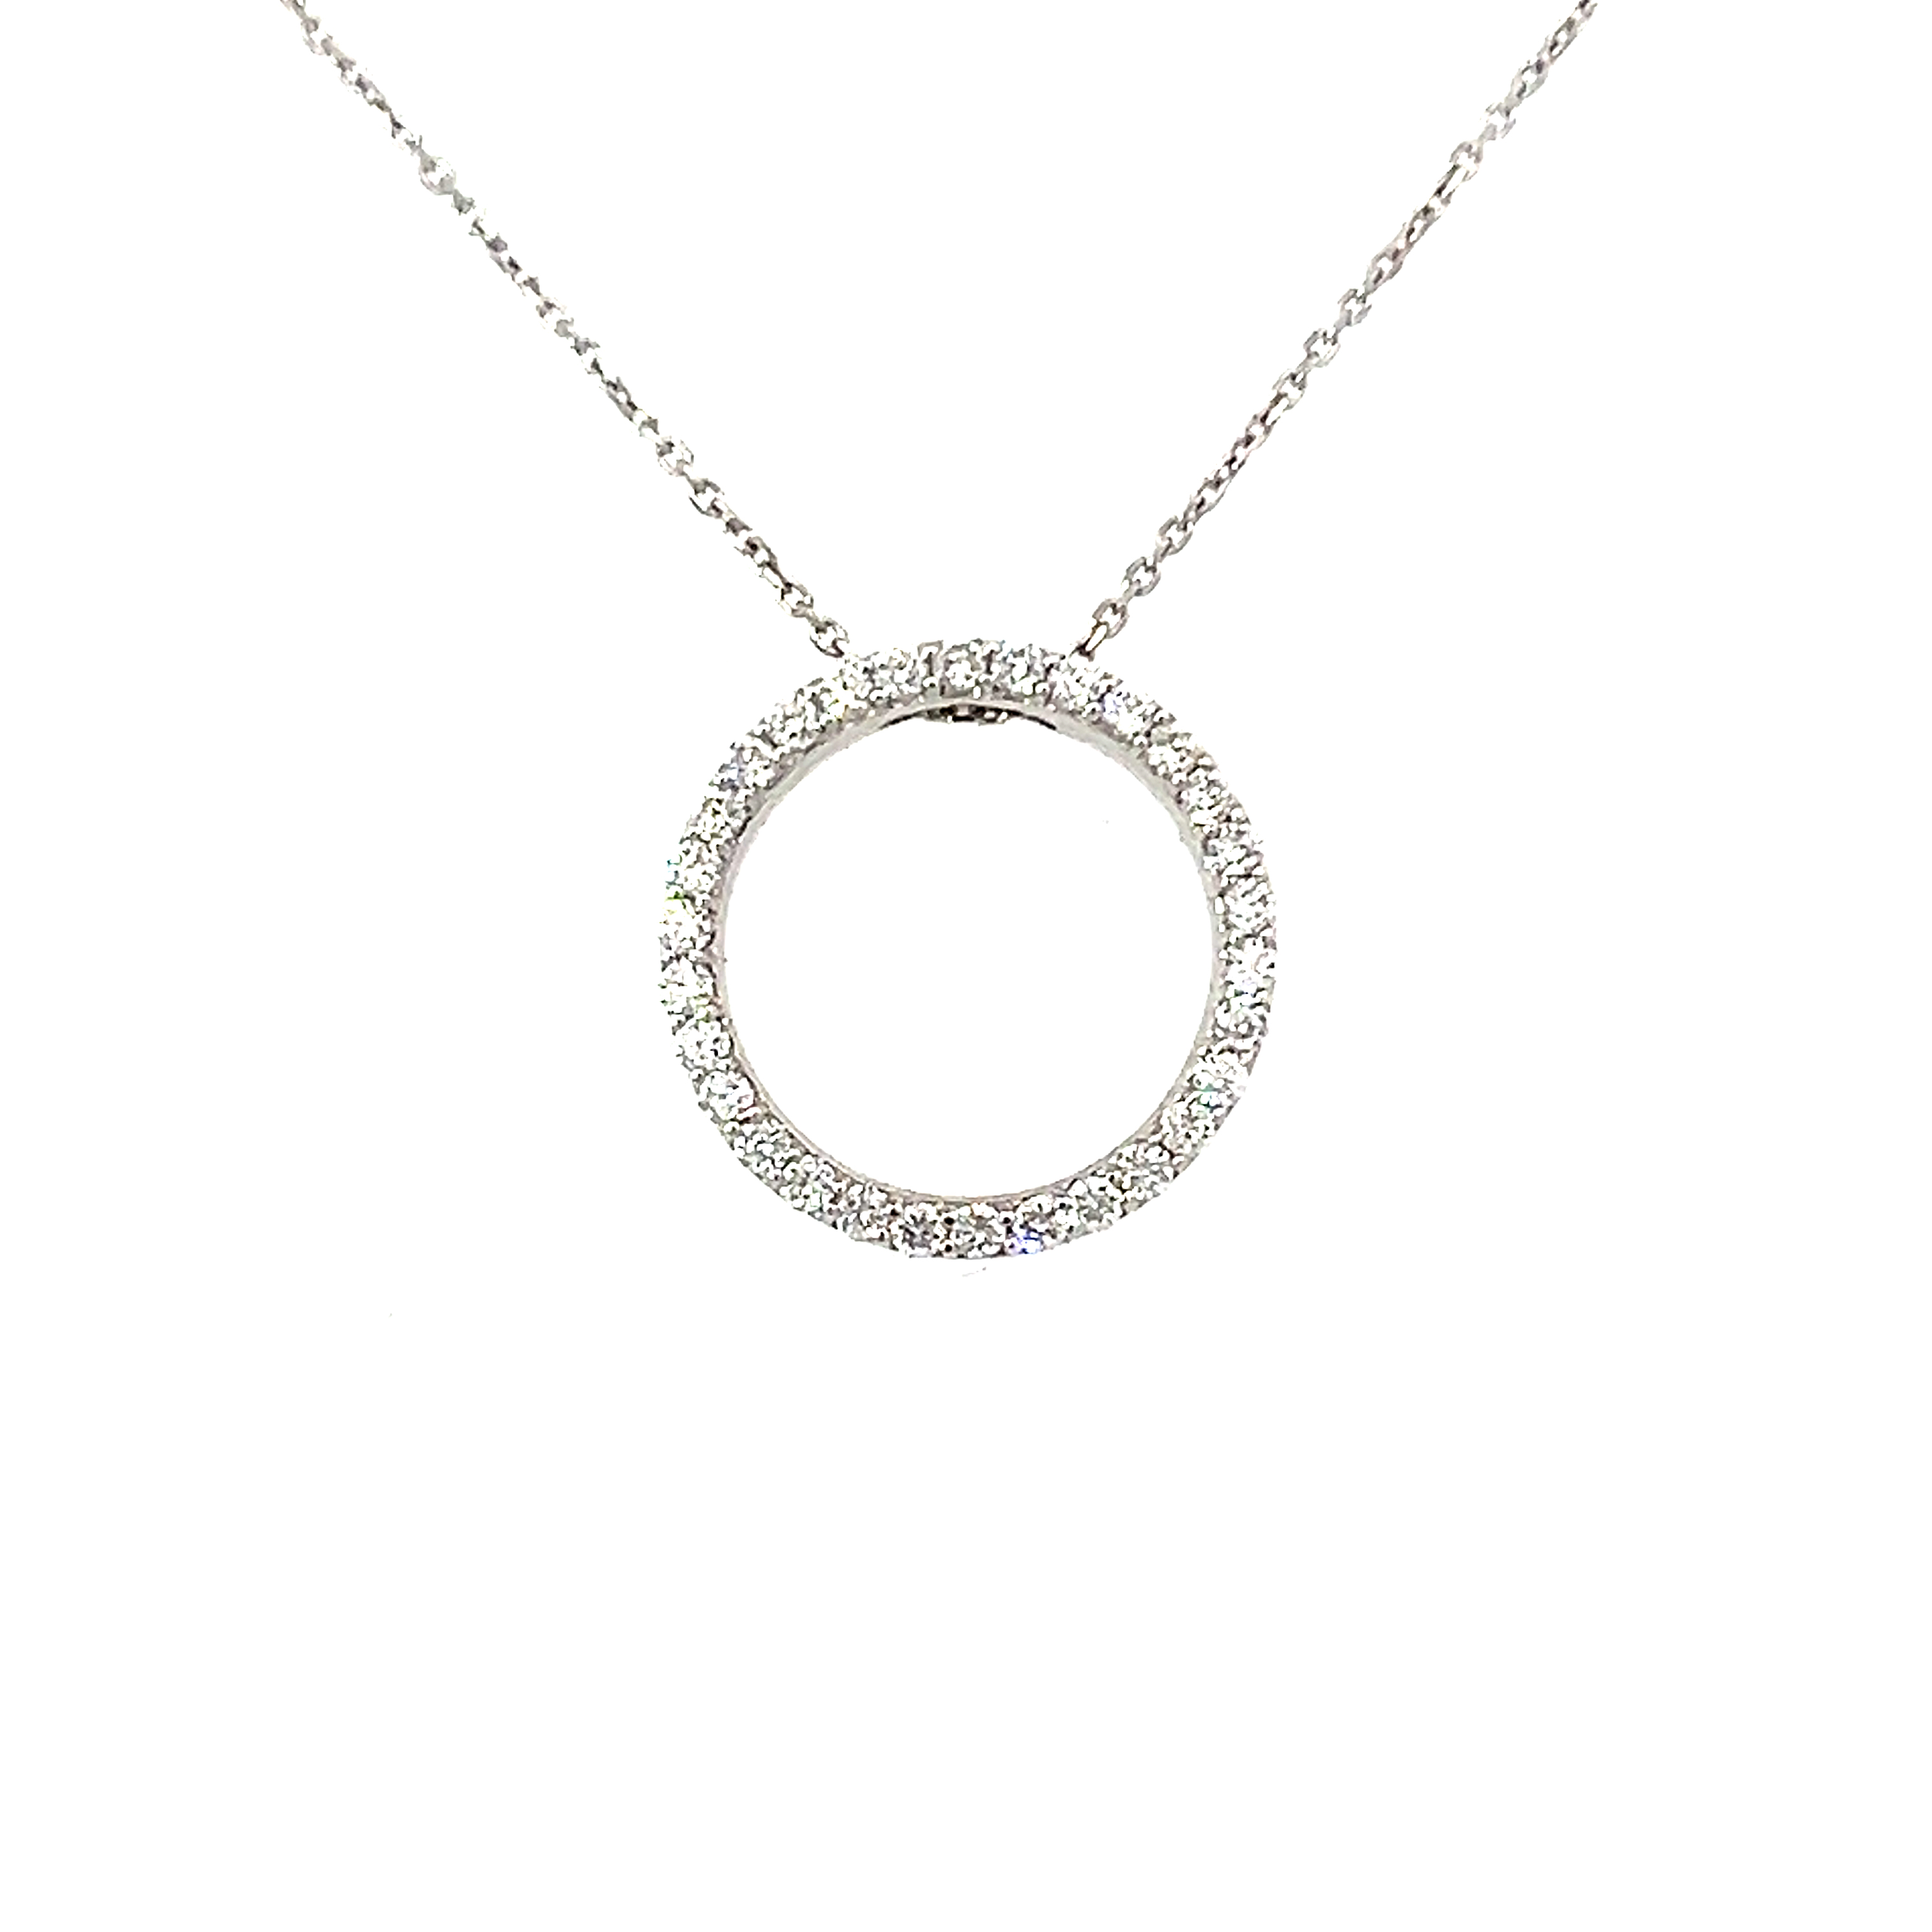 18 Carat White Gold and Diamond Circle Necklace - 0.40 Cts